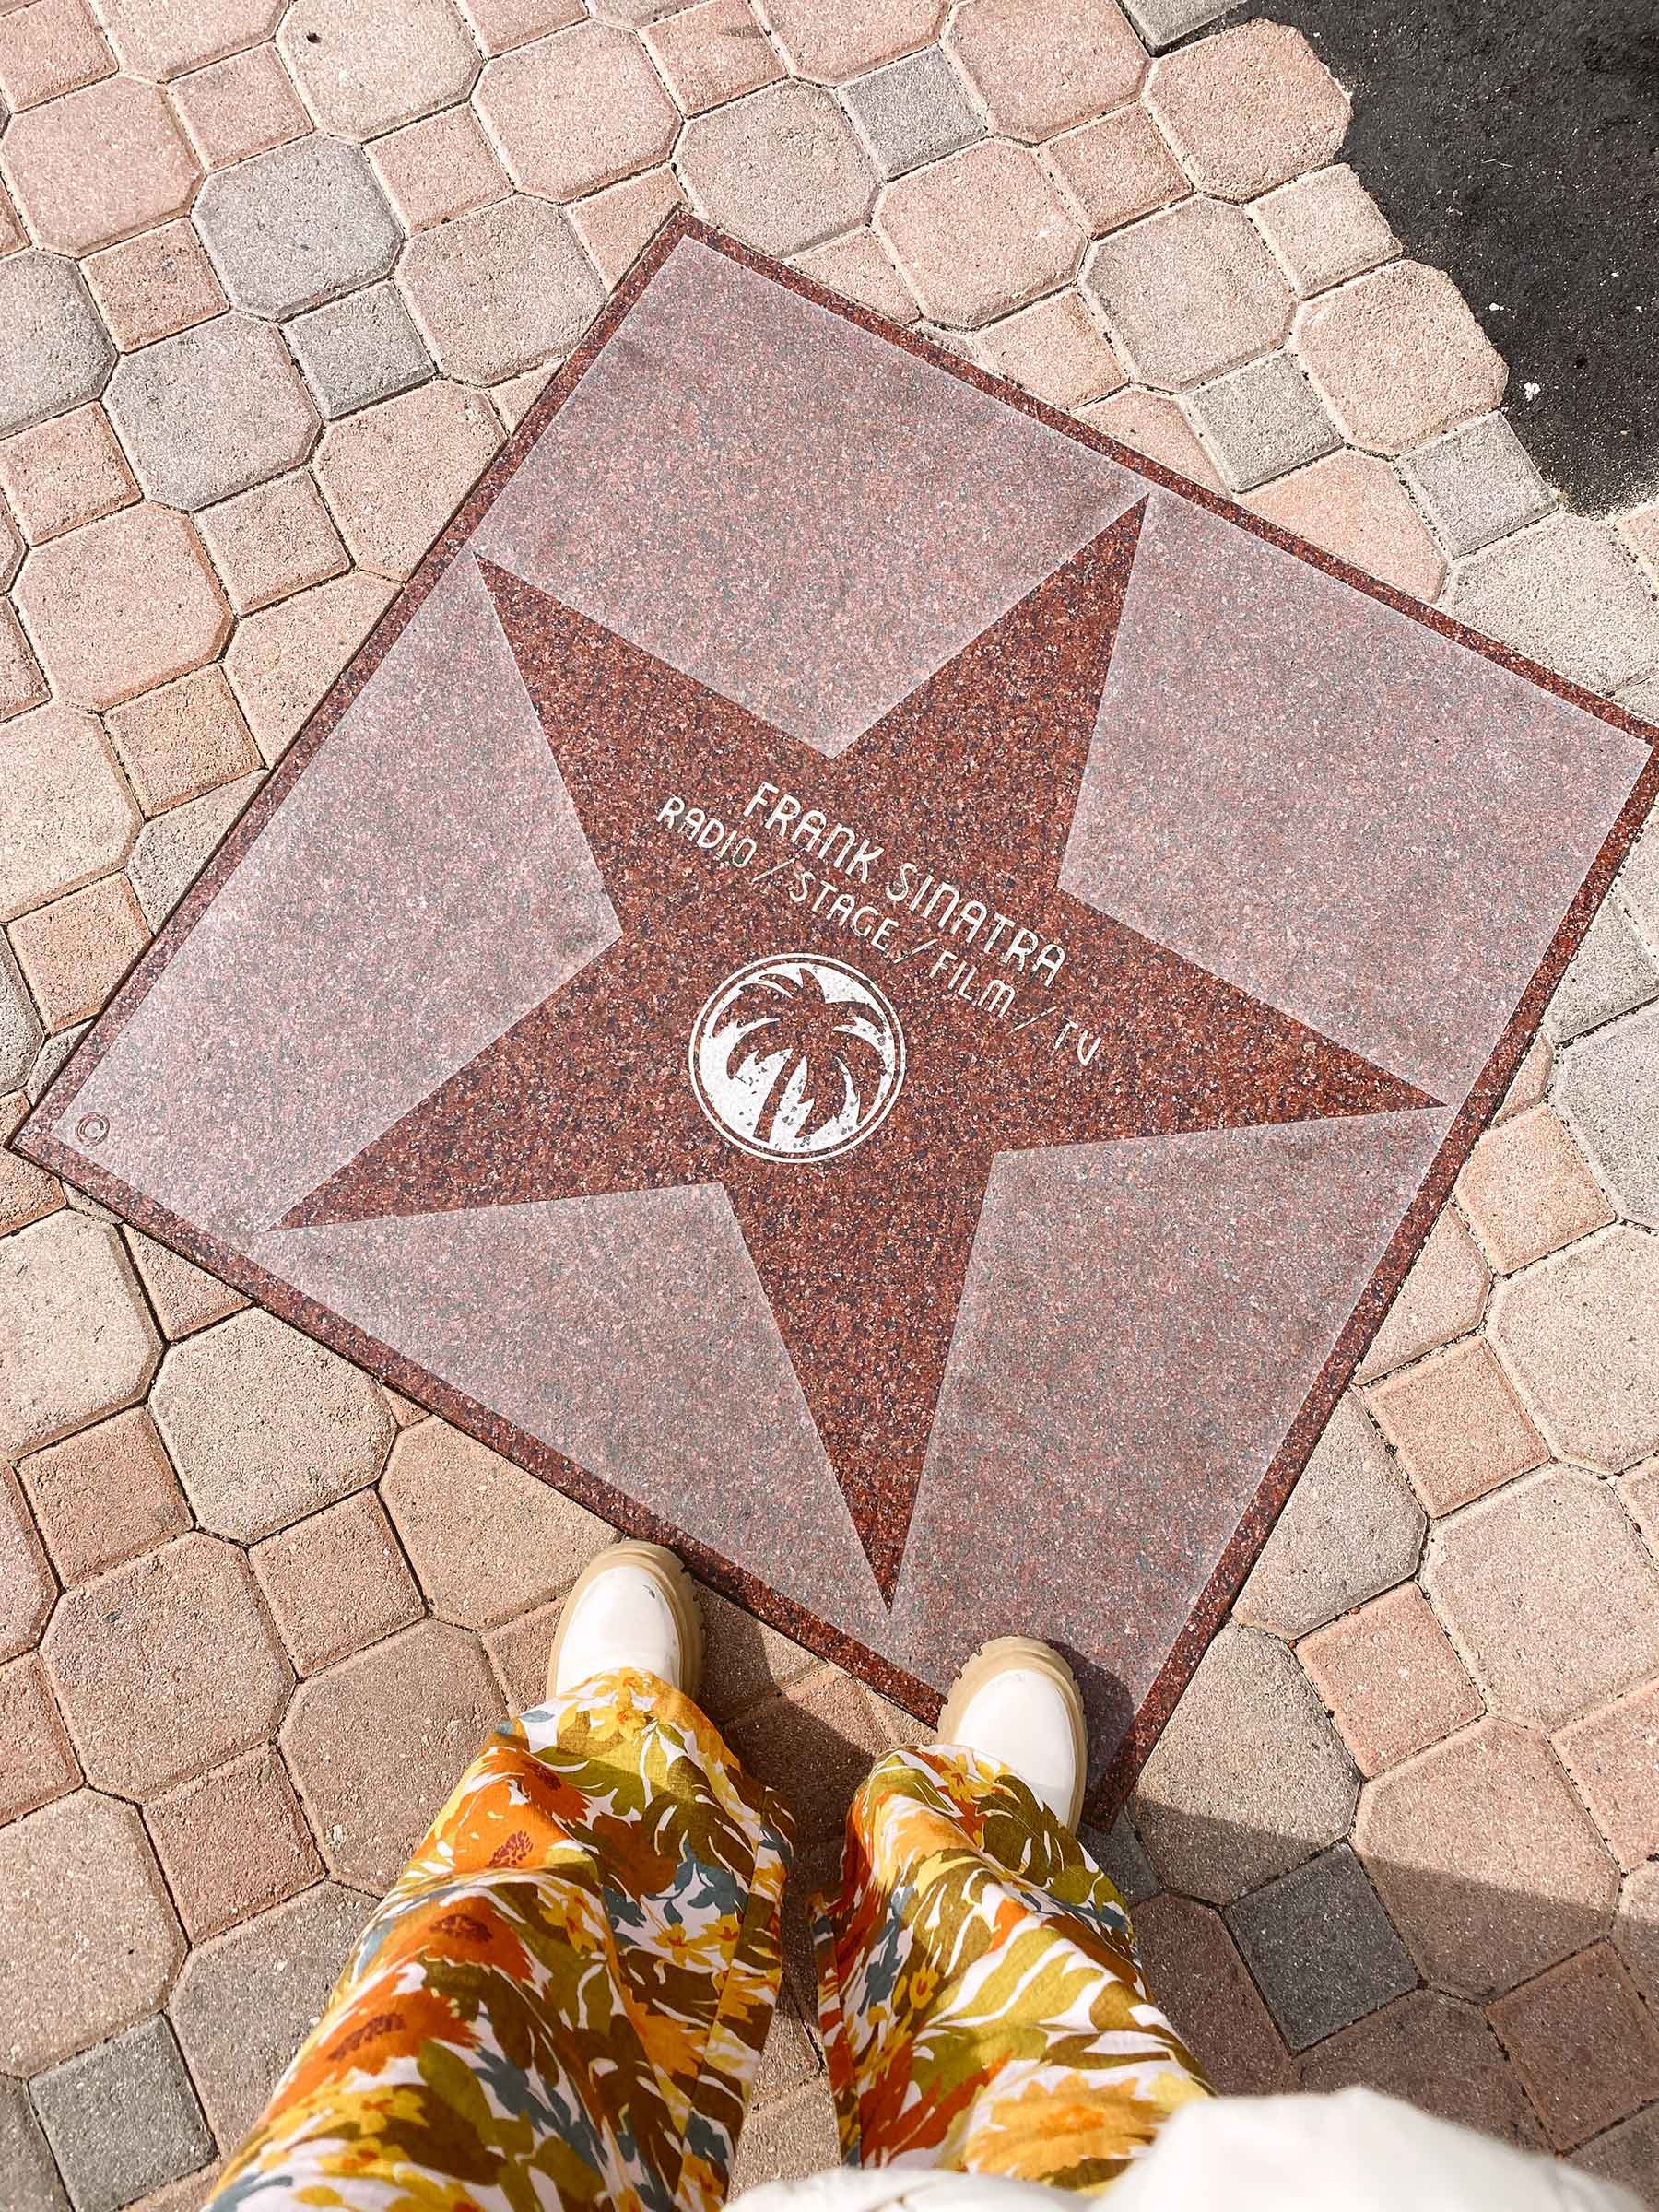 Marilyn Monroe's Star on the Palm Springs Walk of Stars - Public Art in  Downtown Palm Springs